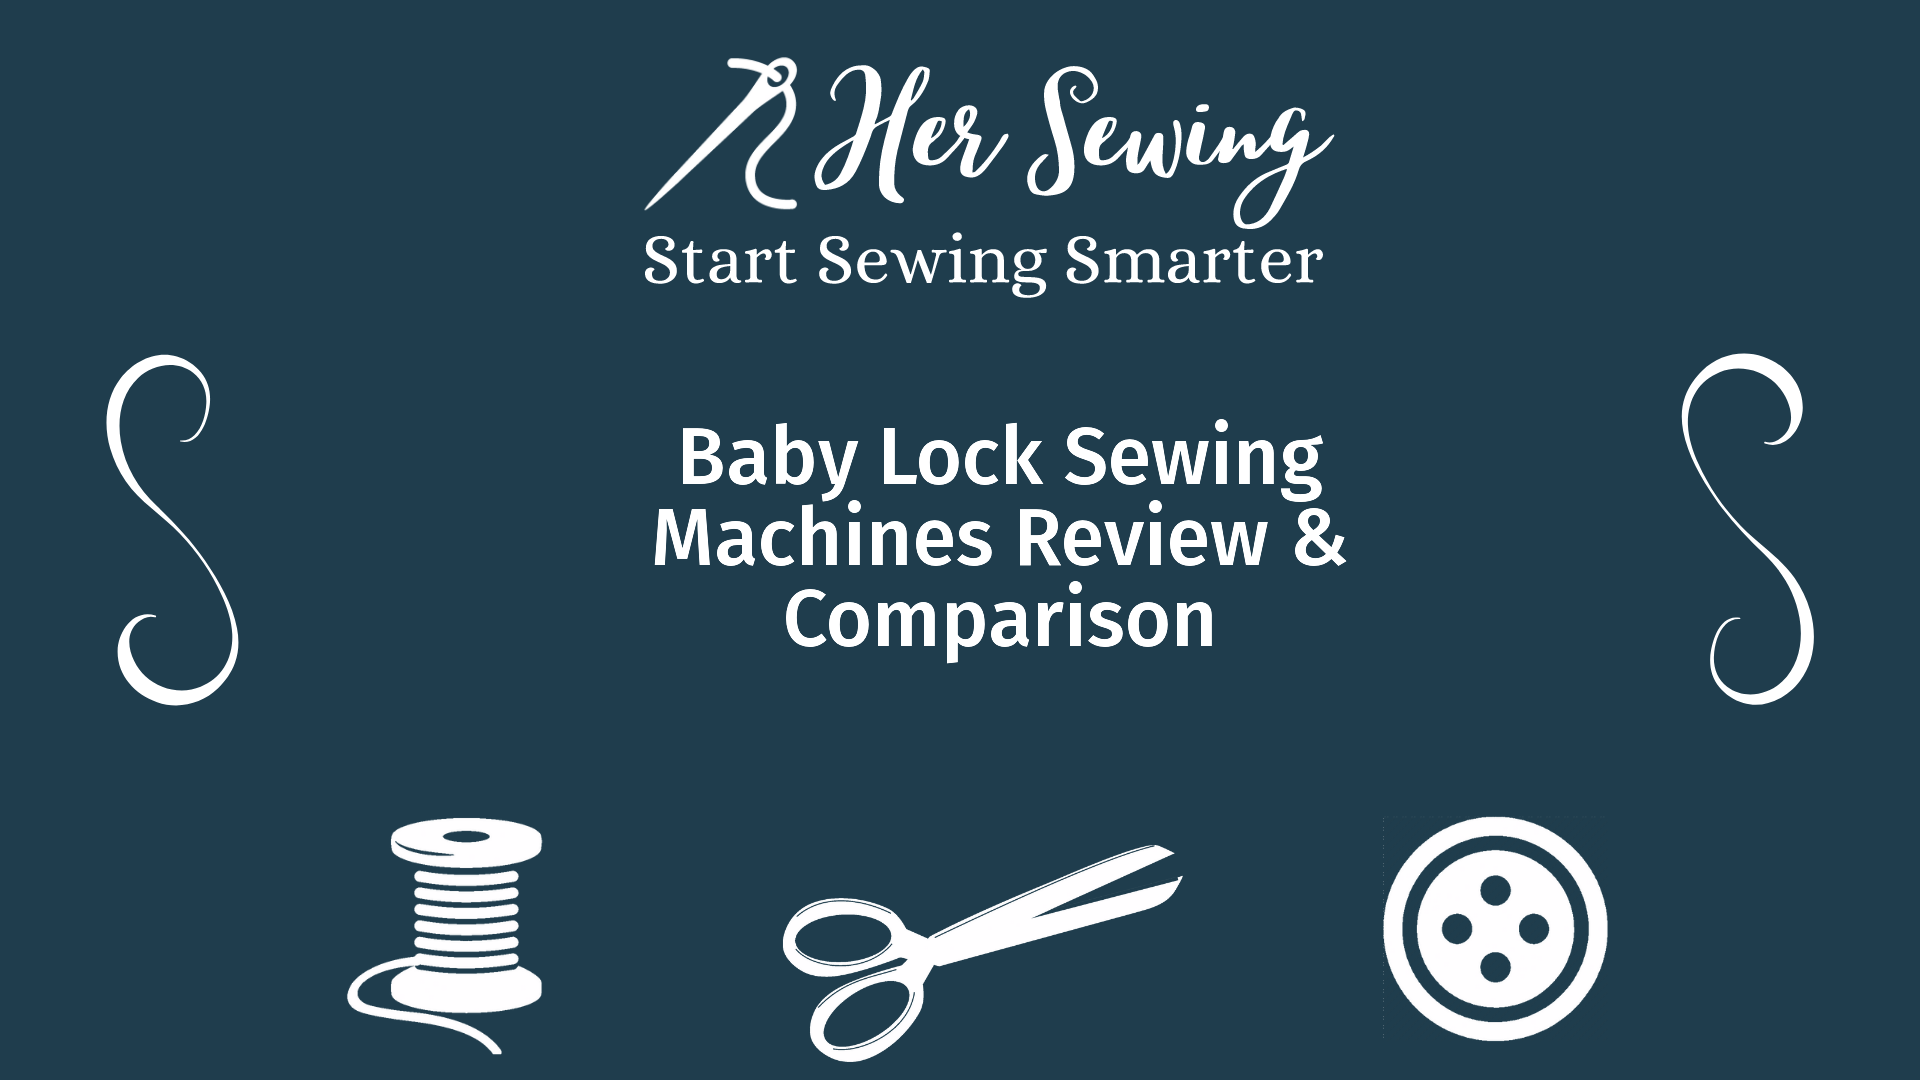 Baby Lock Sewing Machines Review & Comparison